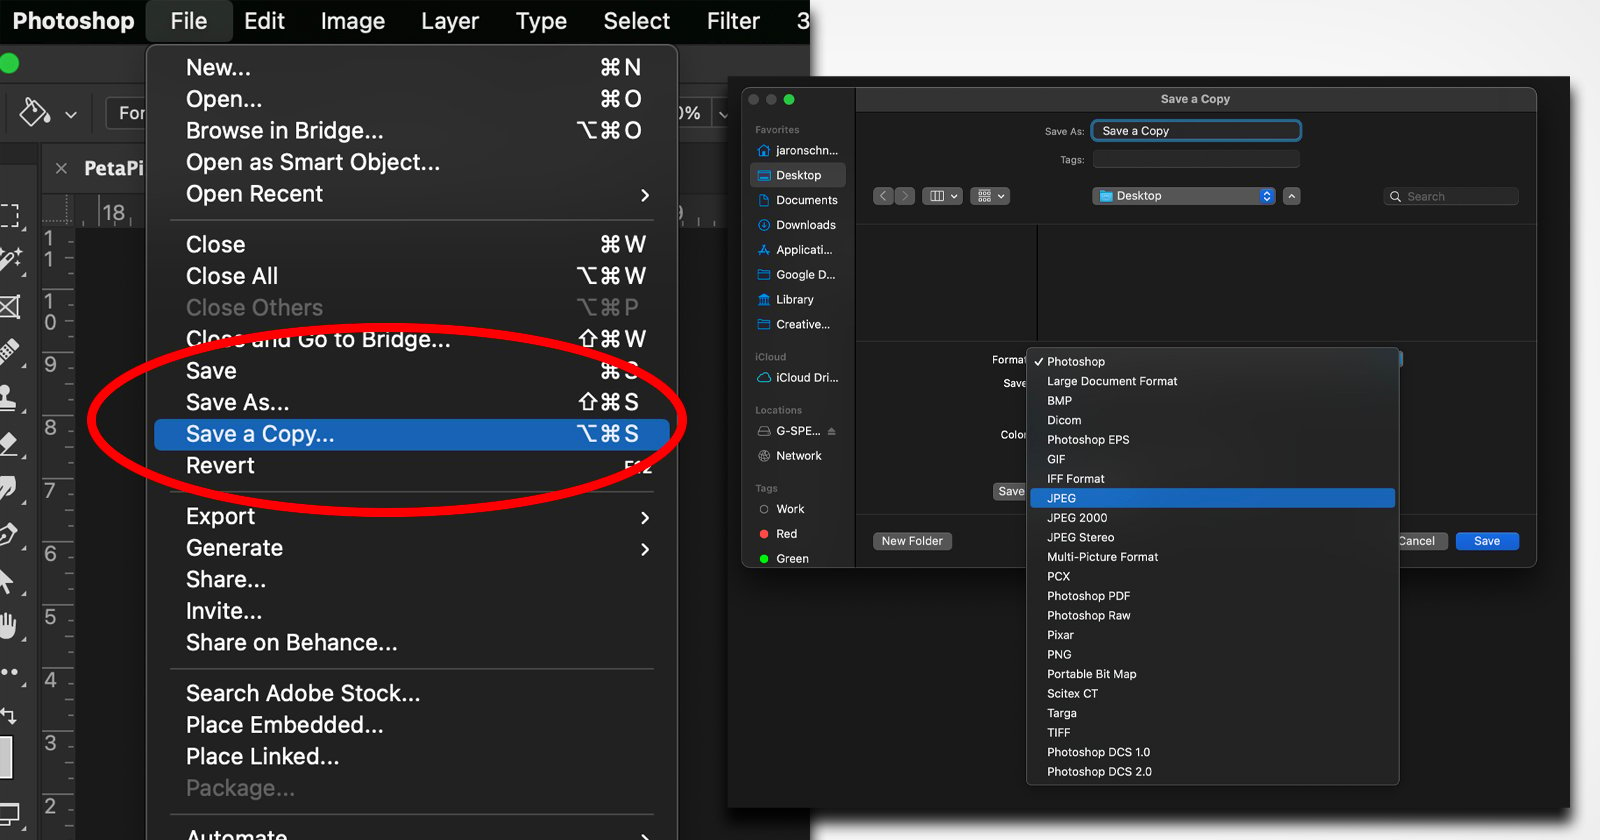 Photoshop's 'Save As' Function Has Changed. Here's Why | PetaPixel